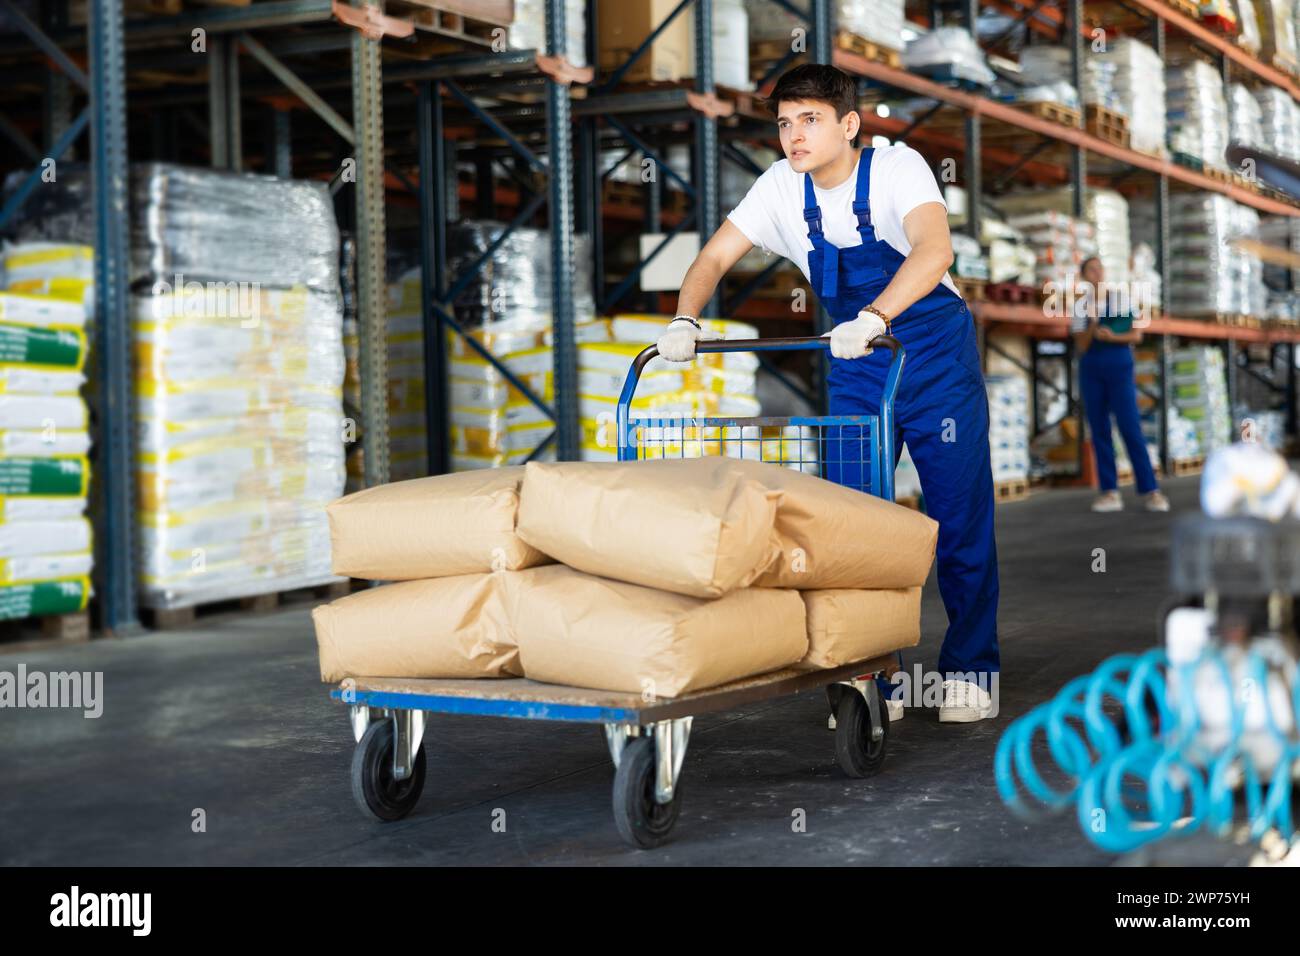 Young guy rolls cart with bags in warehouse Stock Photo